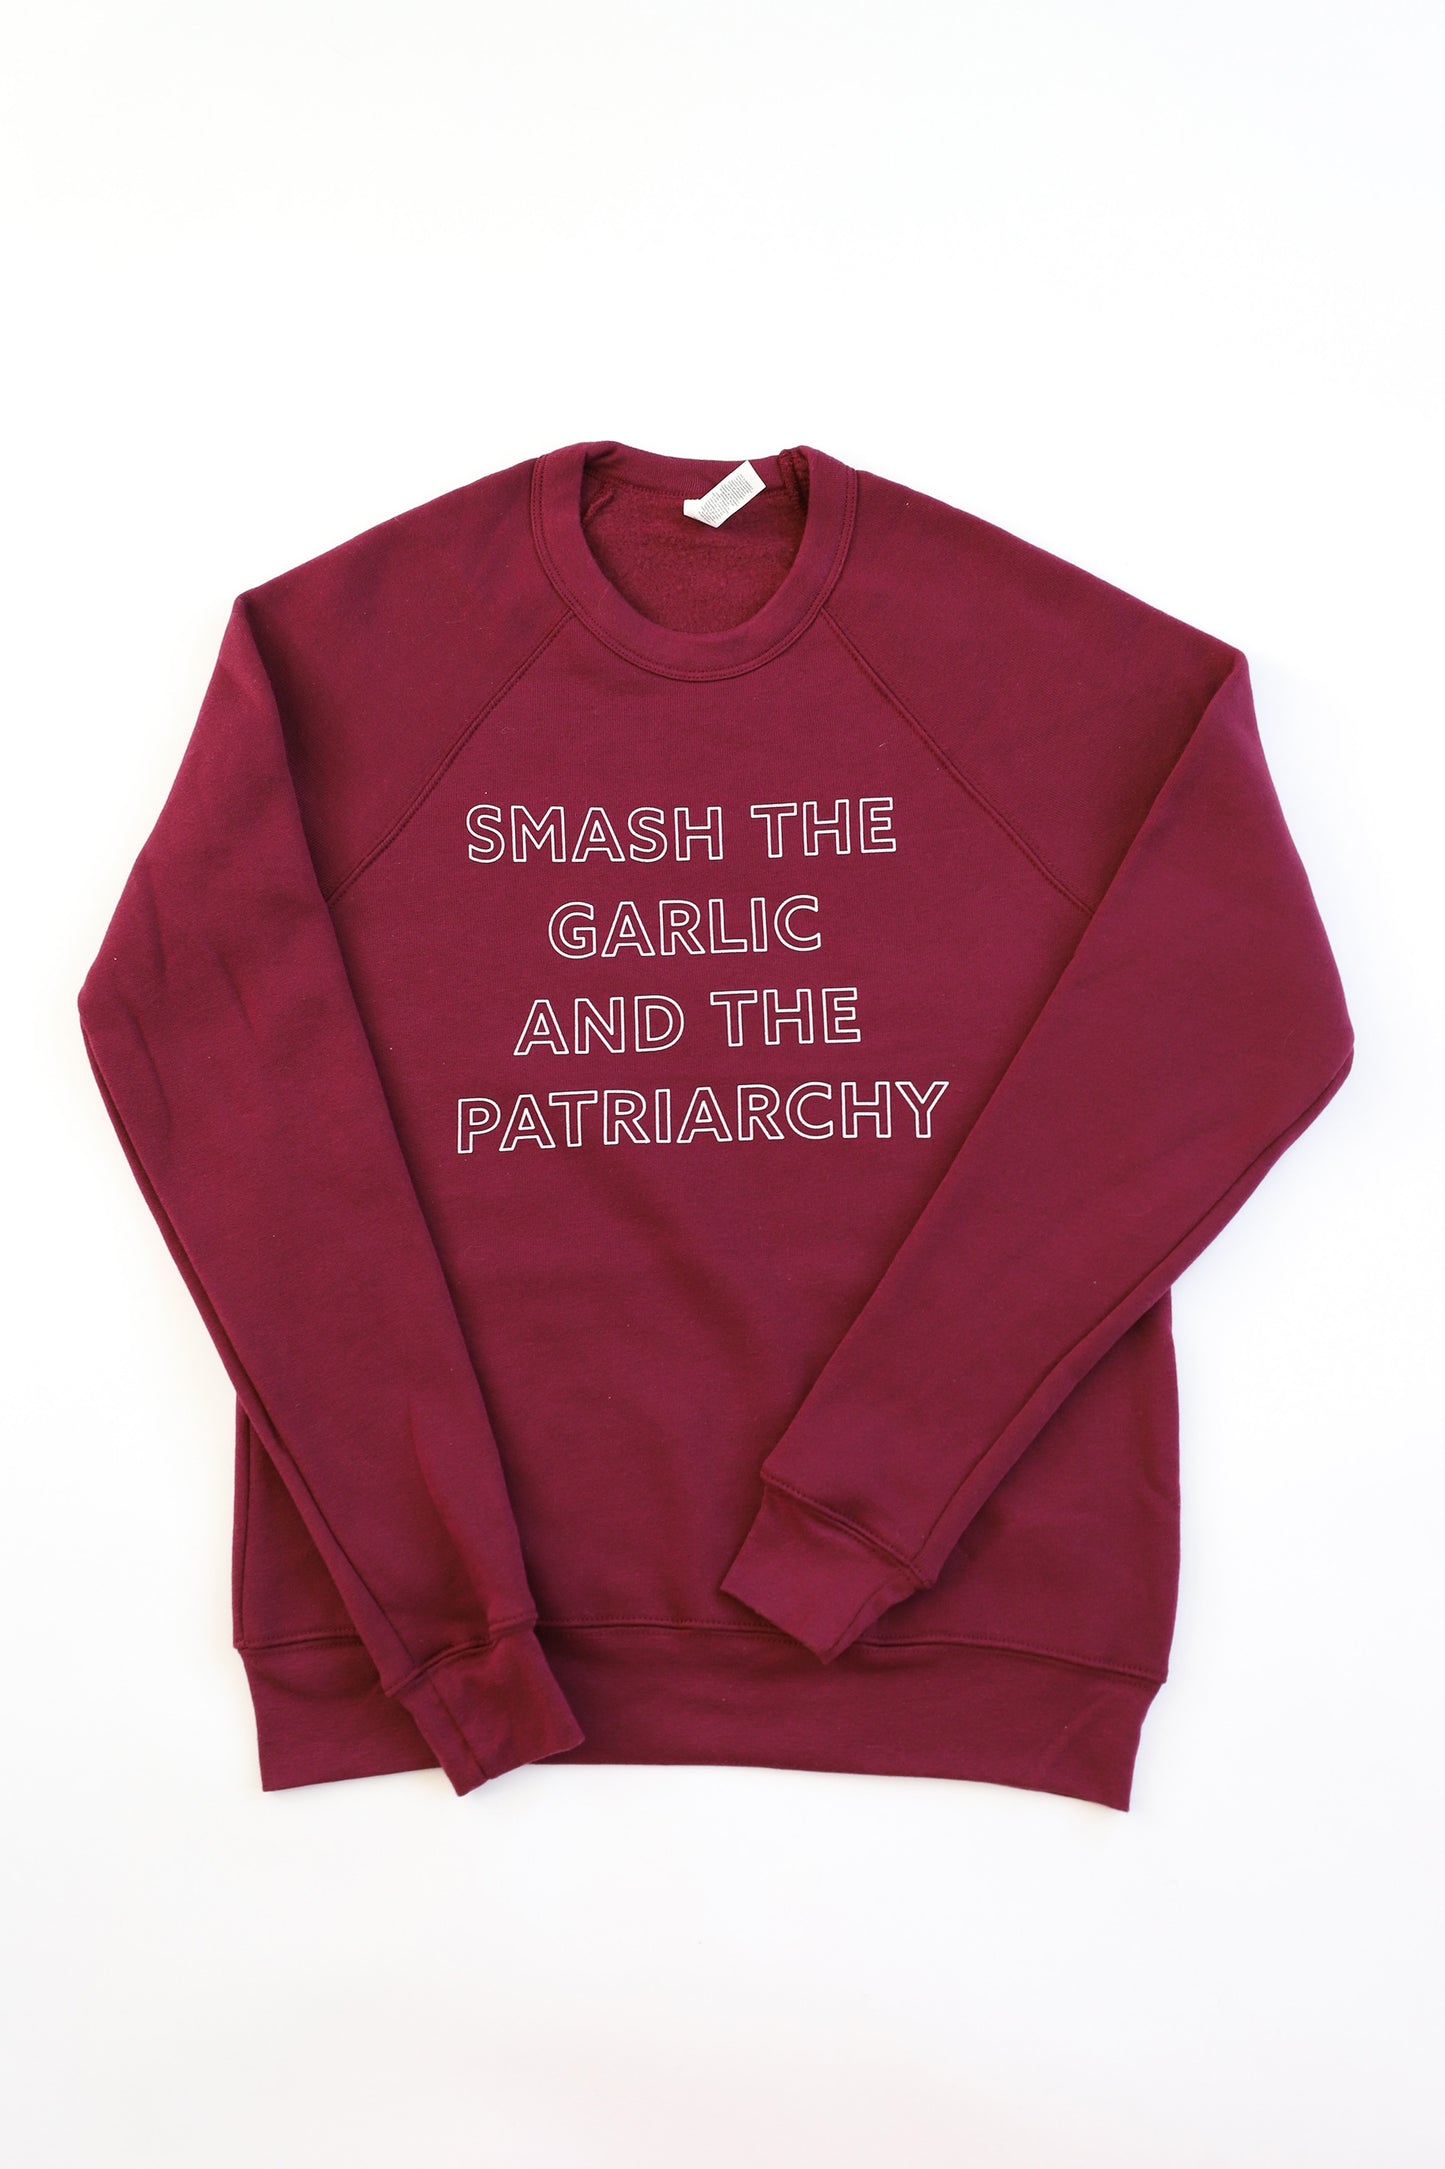 A maroon crewneck sweatshirt reads "Smash the Garlic and the Patriarchy" in block letters